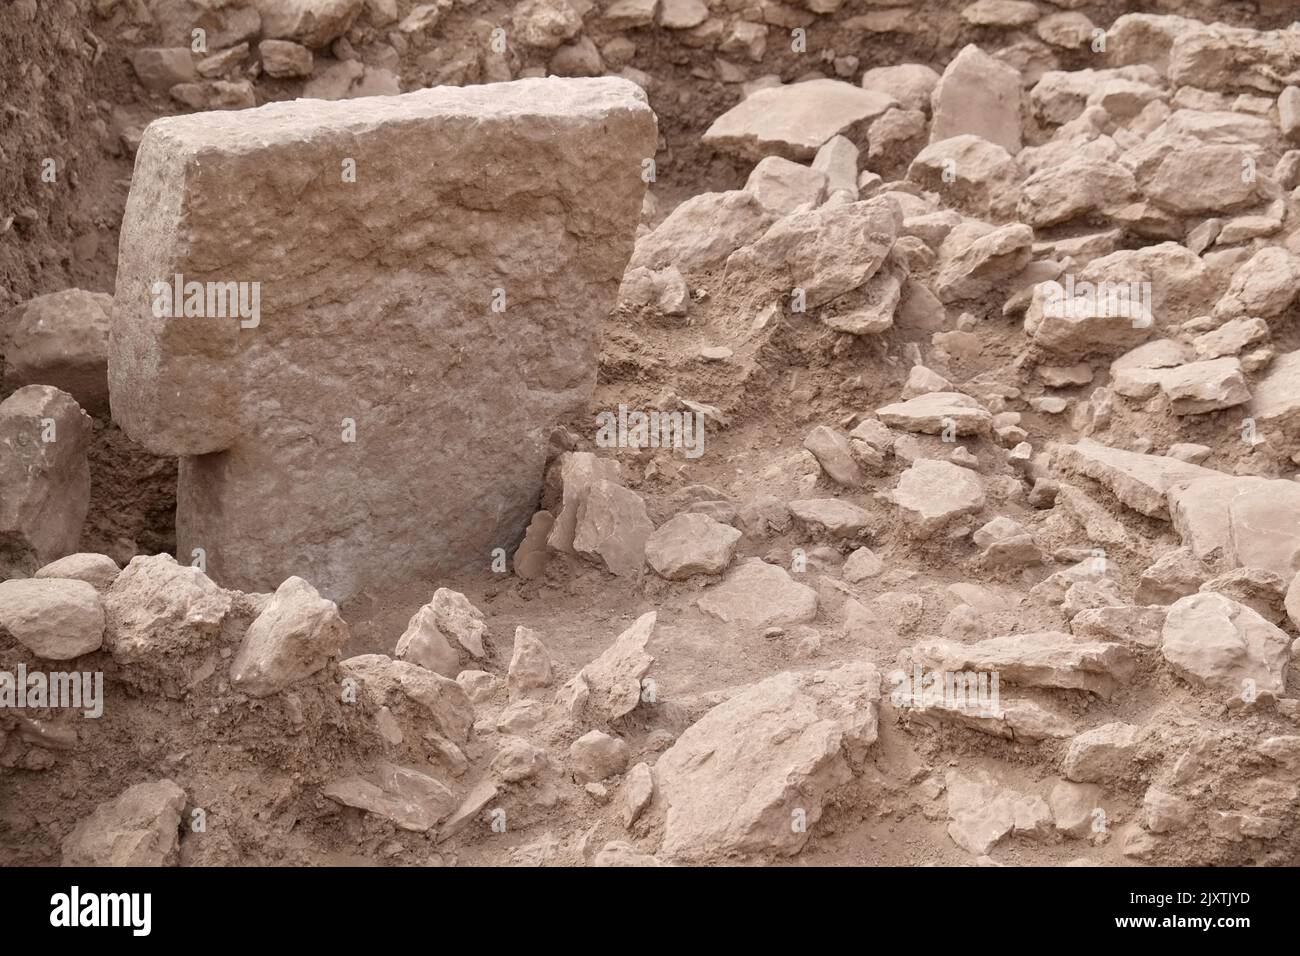 Sayburc, newly discovered pre-pottery neolithic site in southeastern Turkey Stock Photo